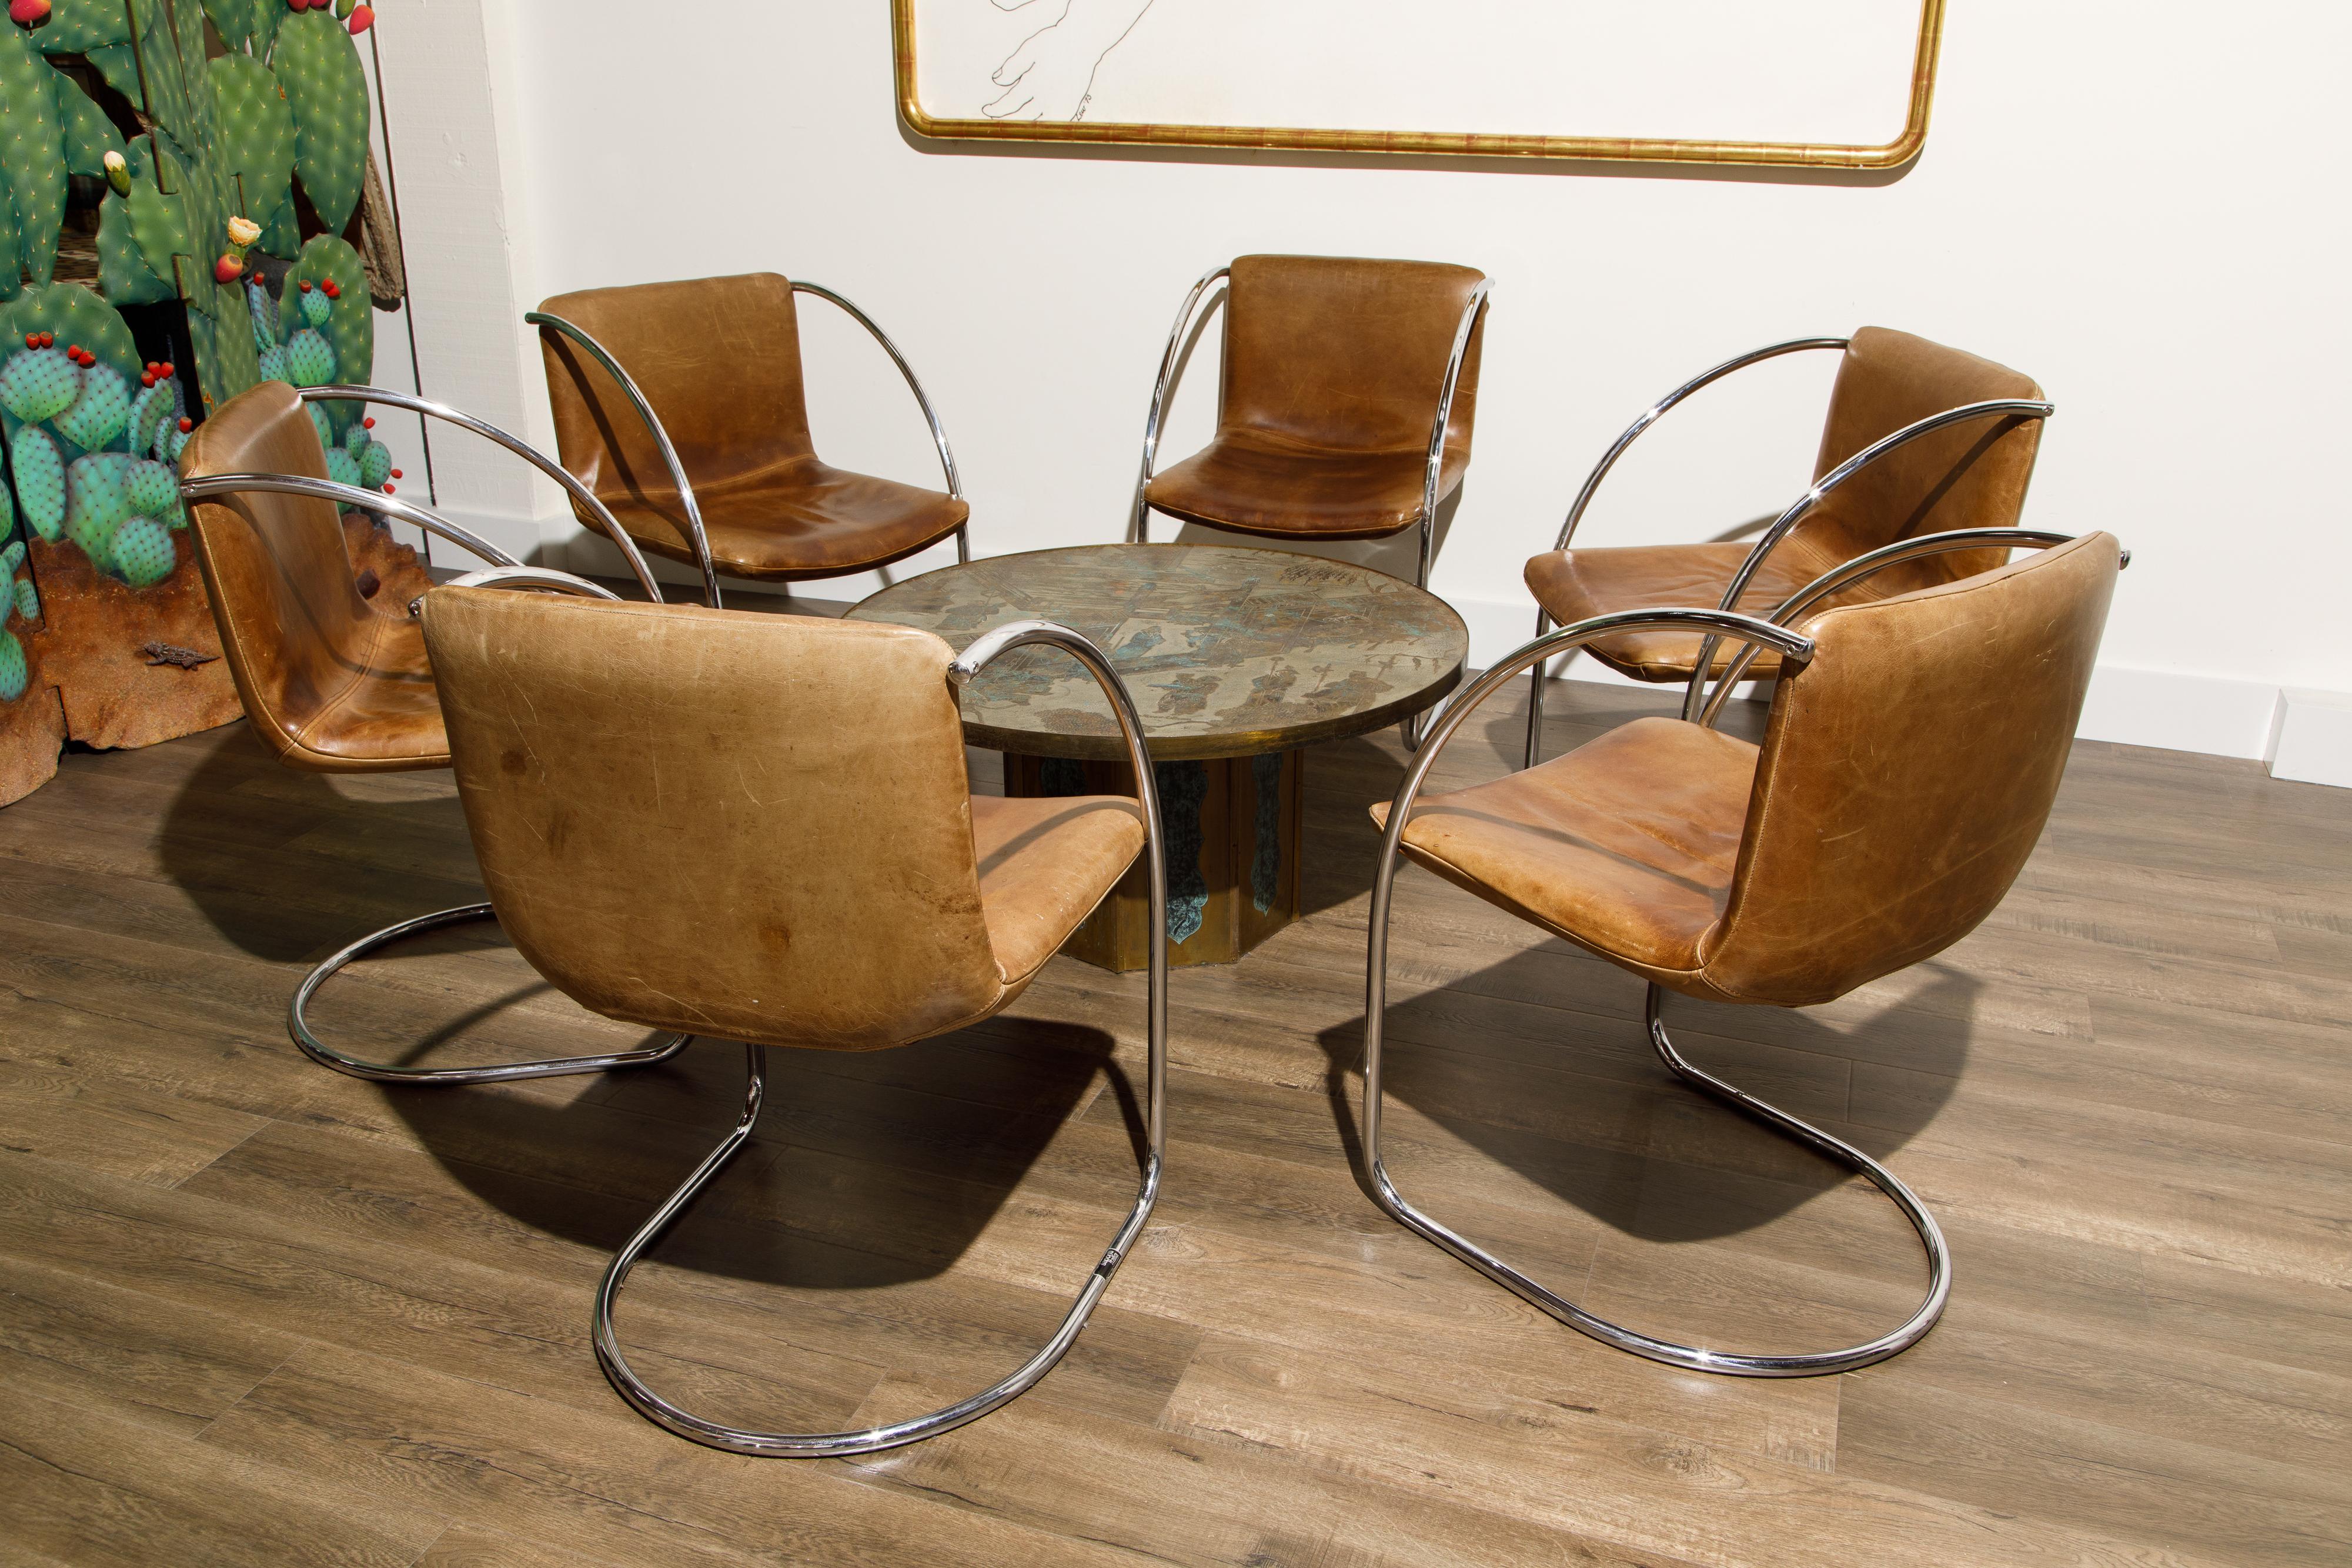 'Lens' Leather Chairs by Giovanni Offredi for Saporiti Italia, c. 1968, Signed 9